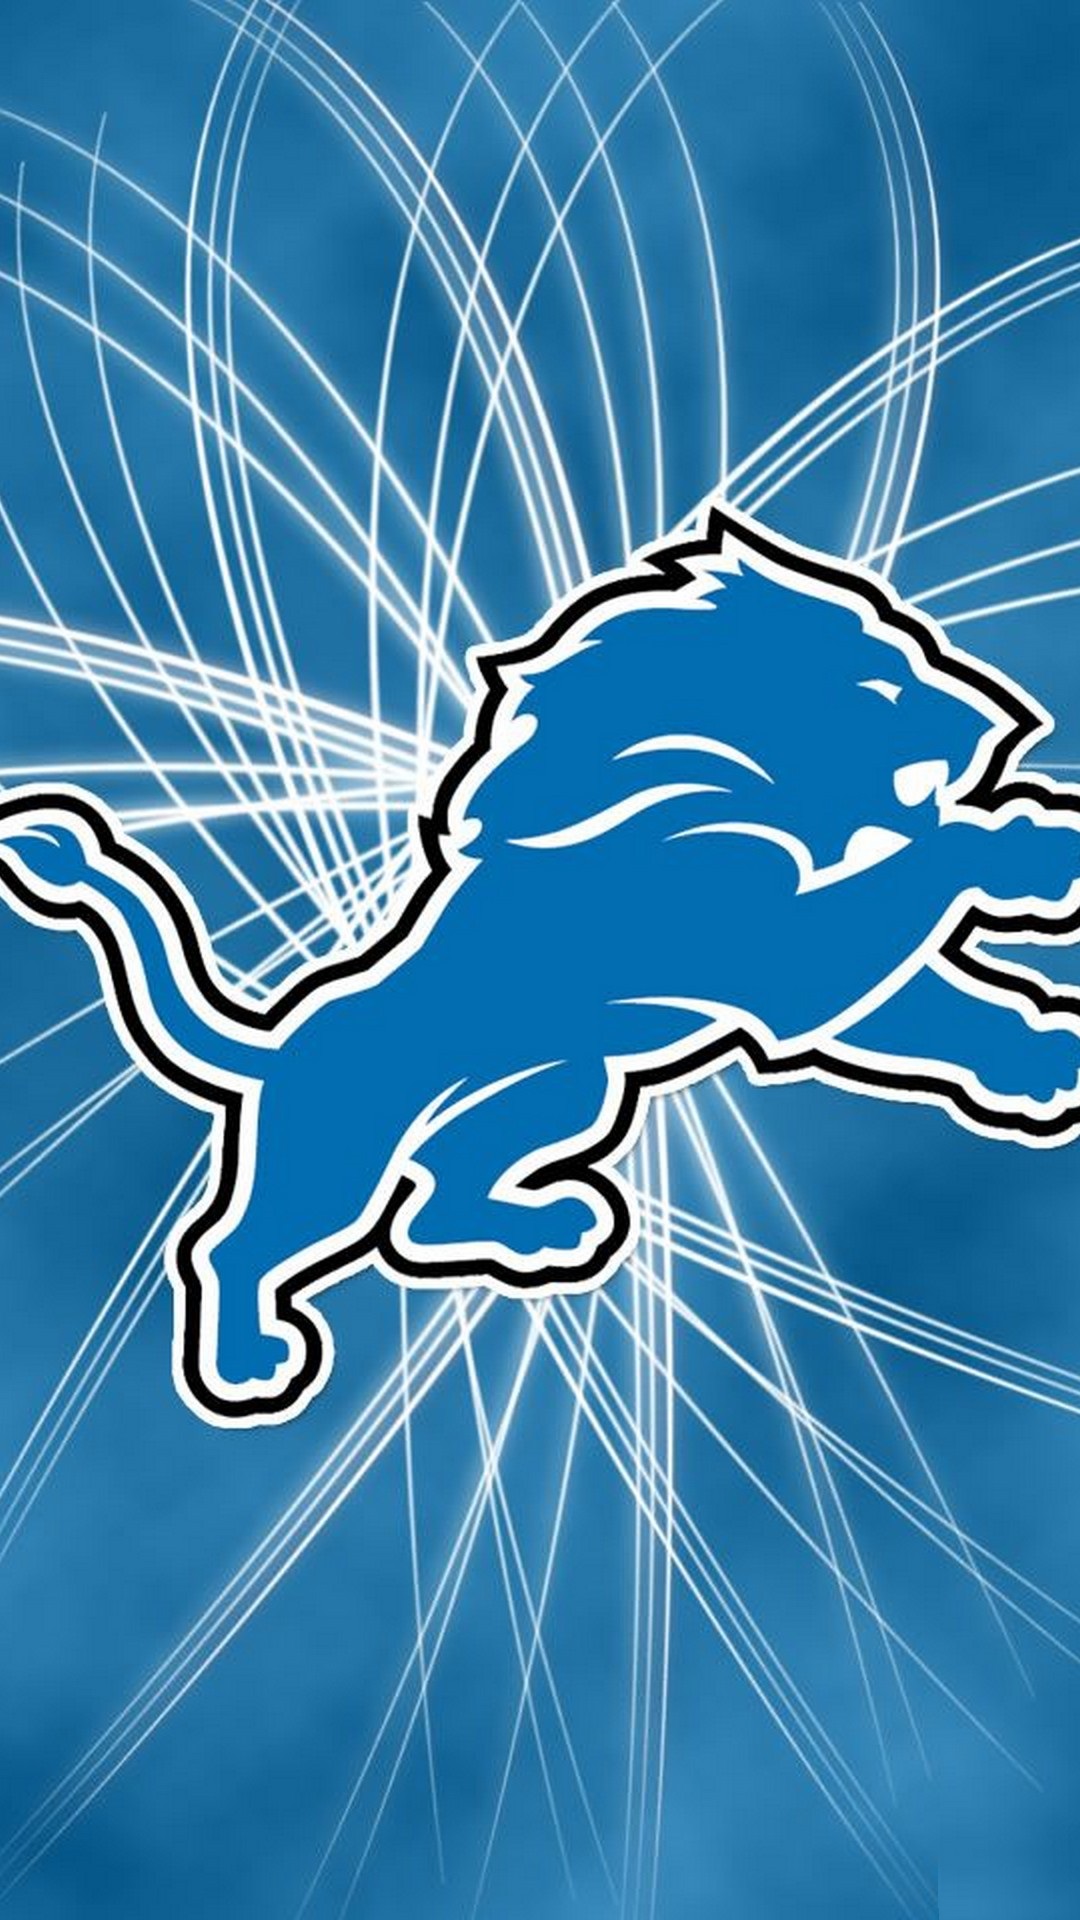 Detroit Lions iPhone Wallpaper Home Screen with high-resolution 1080x1920 pixel. Download and set as wallpaper for Apple iPhone X, XS Max, XR, 8, 7, 6, SE, iPad, Android